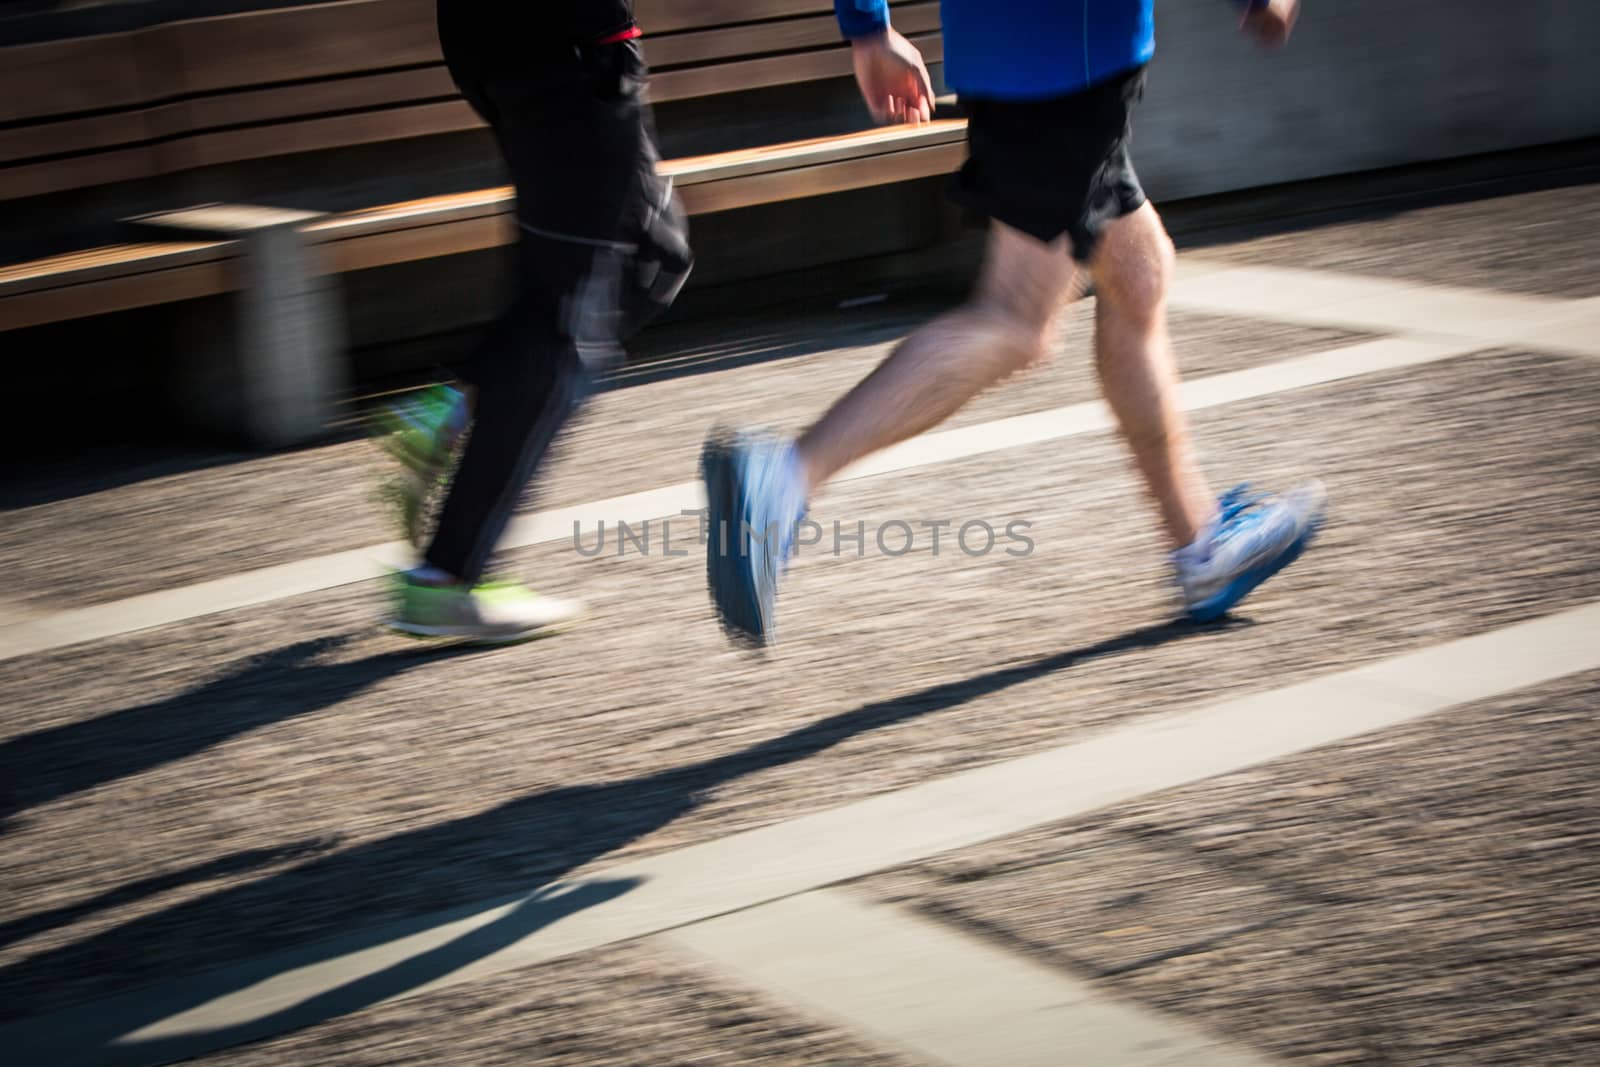 Motion blurred runner's feet in a city environment by viktor_cap